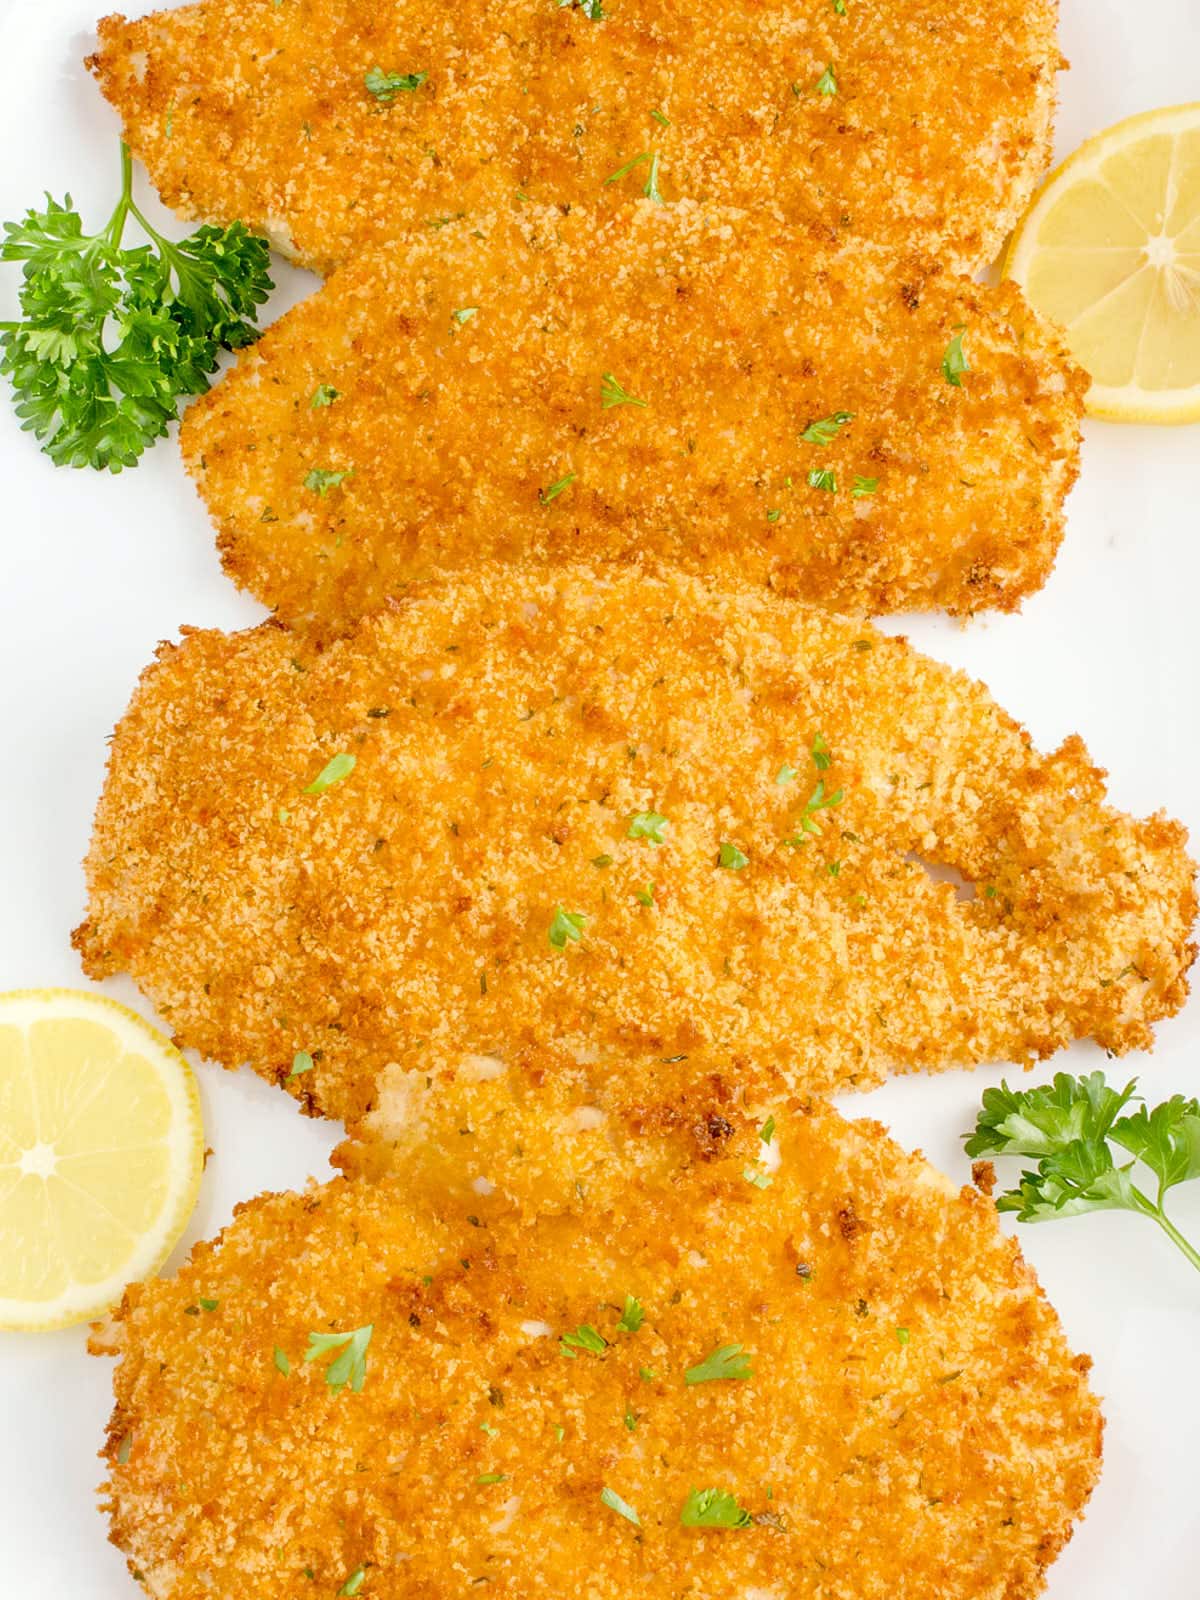 Air-fried fish fillets on a white plate with lemon wedges.